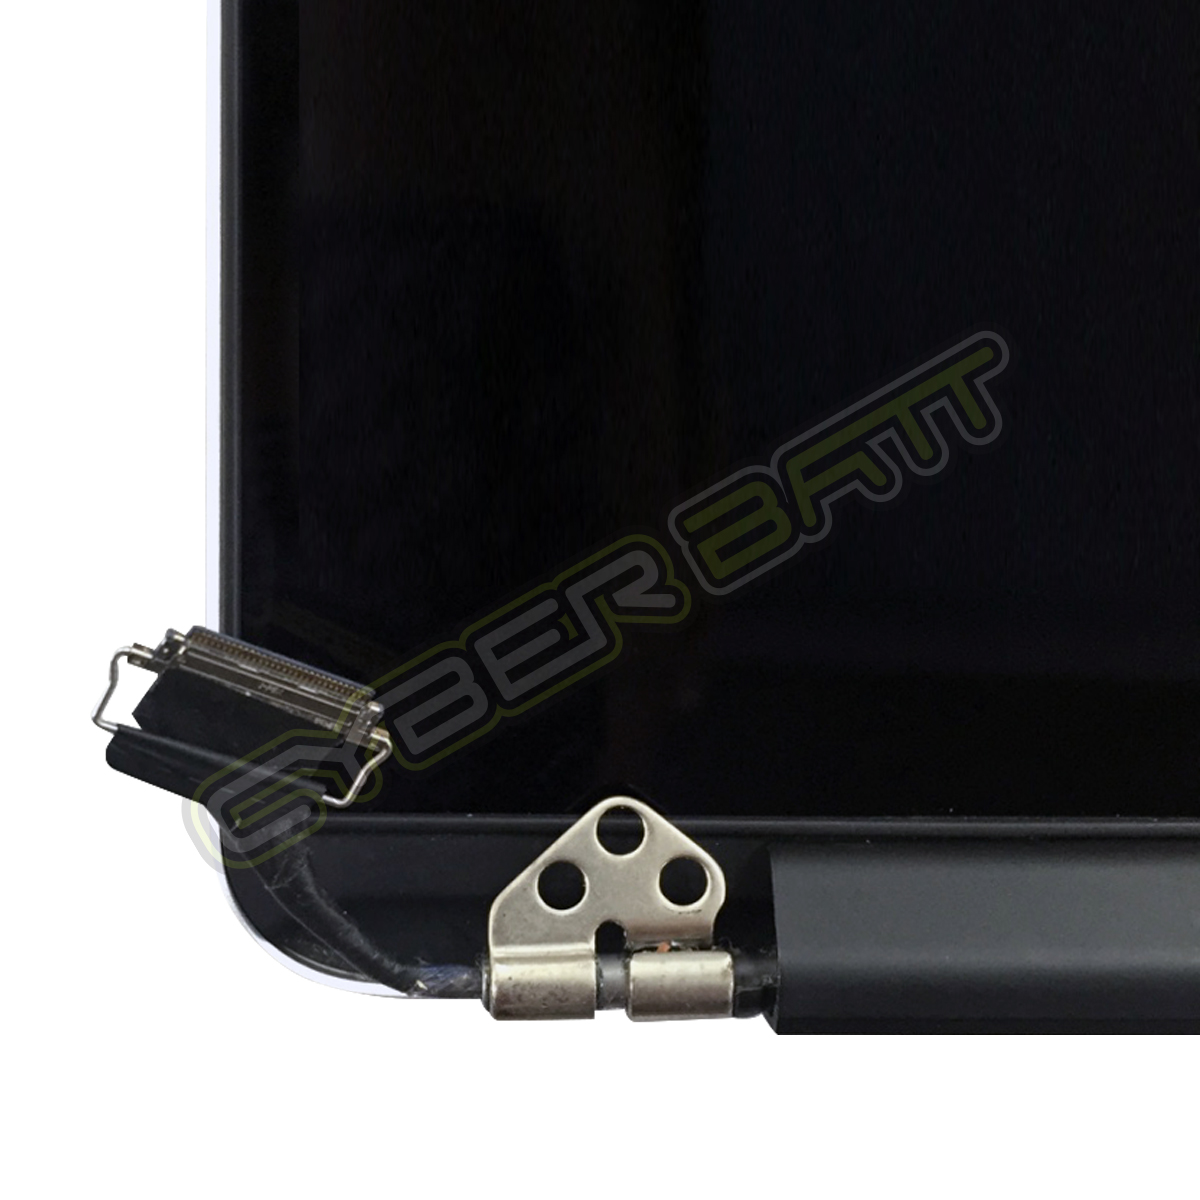 LCD Assembly MacBook Pro Retina 13 A1502 Late 2013-Mid 2014